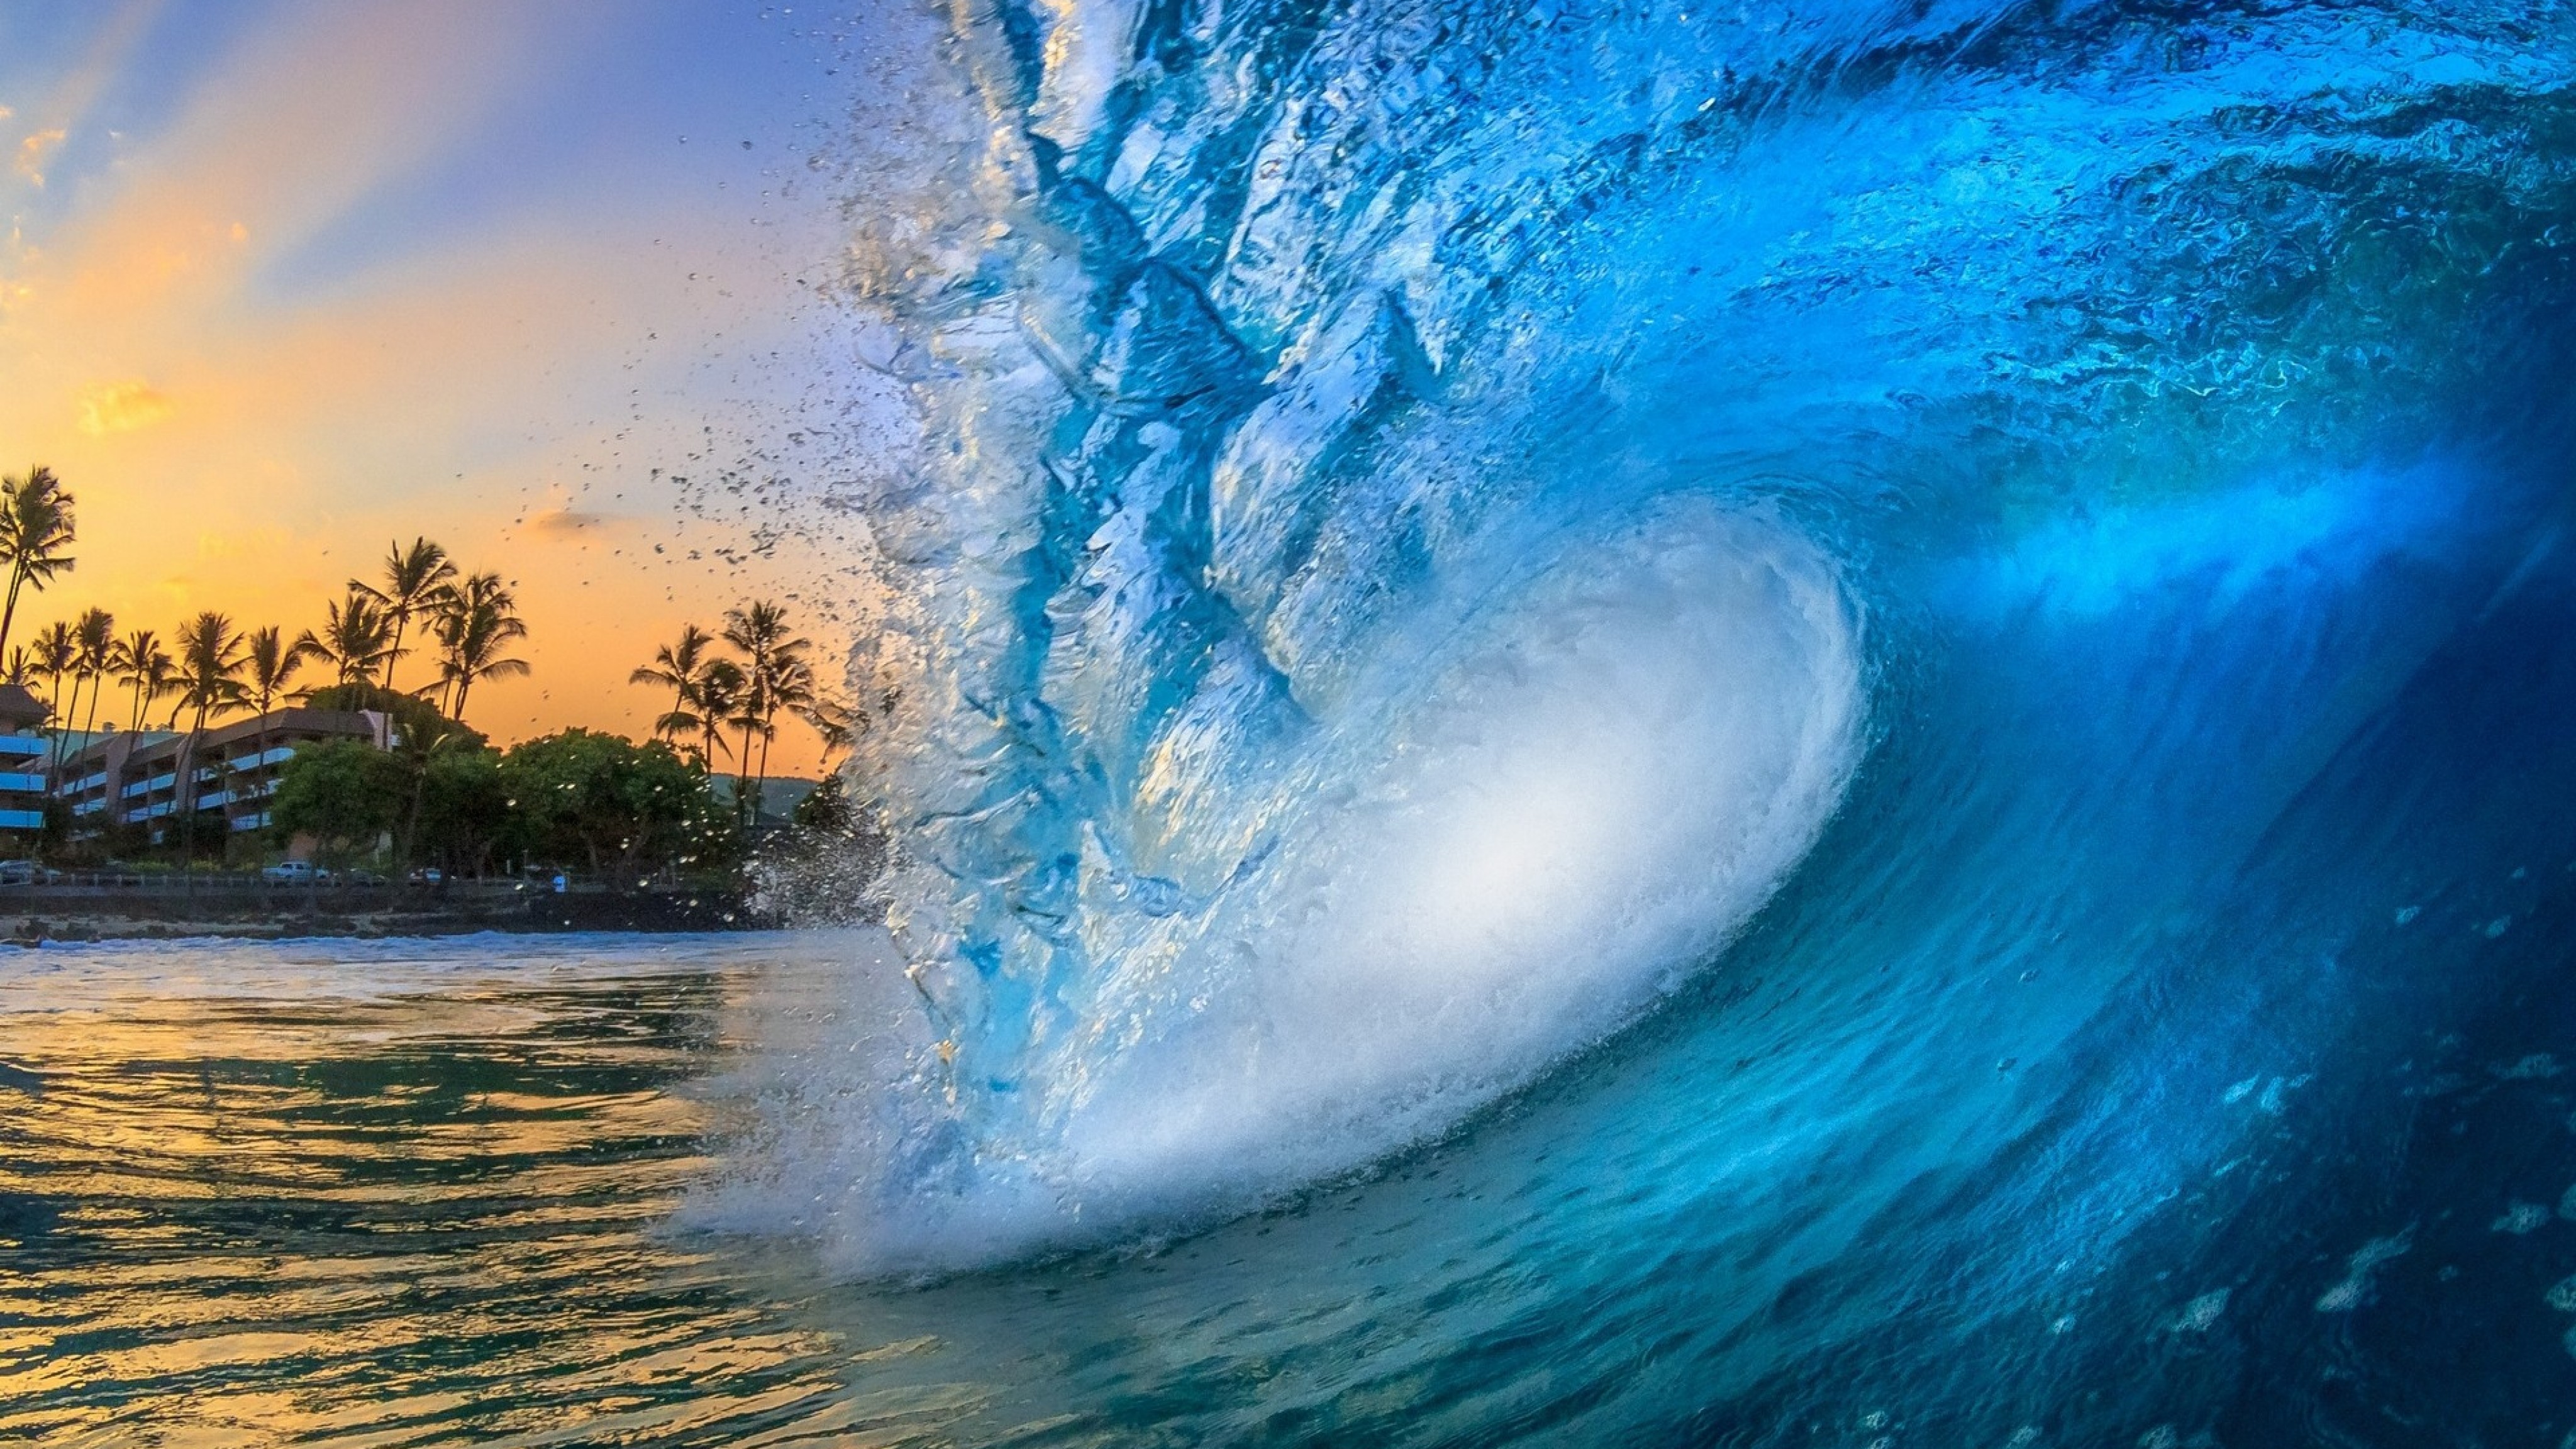 imac 21.5 wallpaper,wave,wind wave,water,nature,water resources